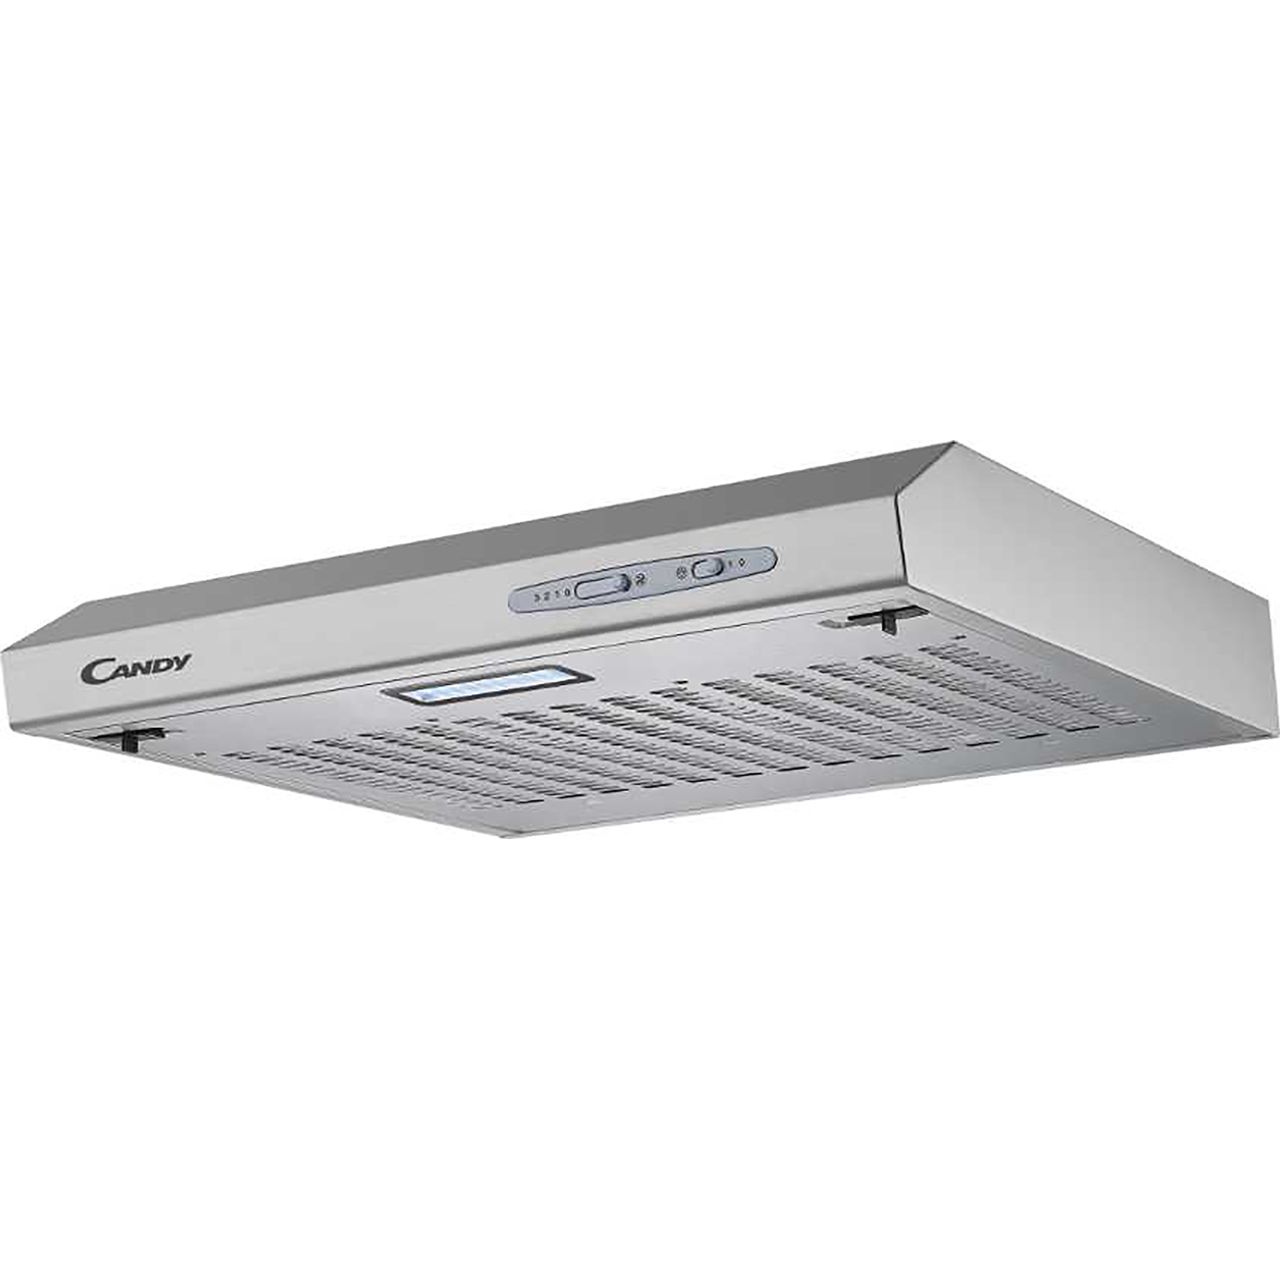 Candy CFT610/5S 60 cm Visor Cooker Hood Review